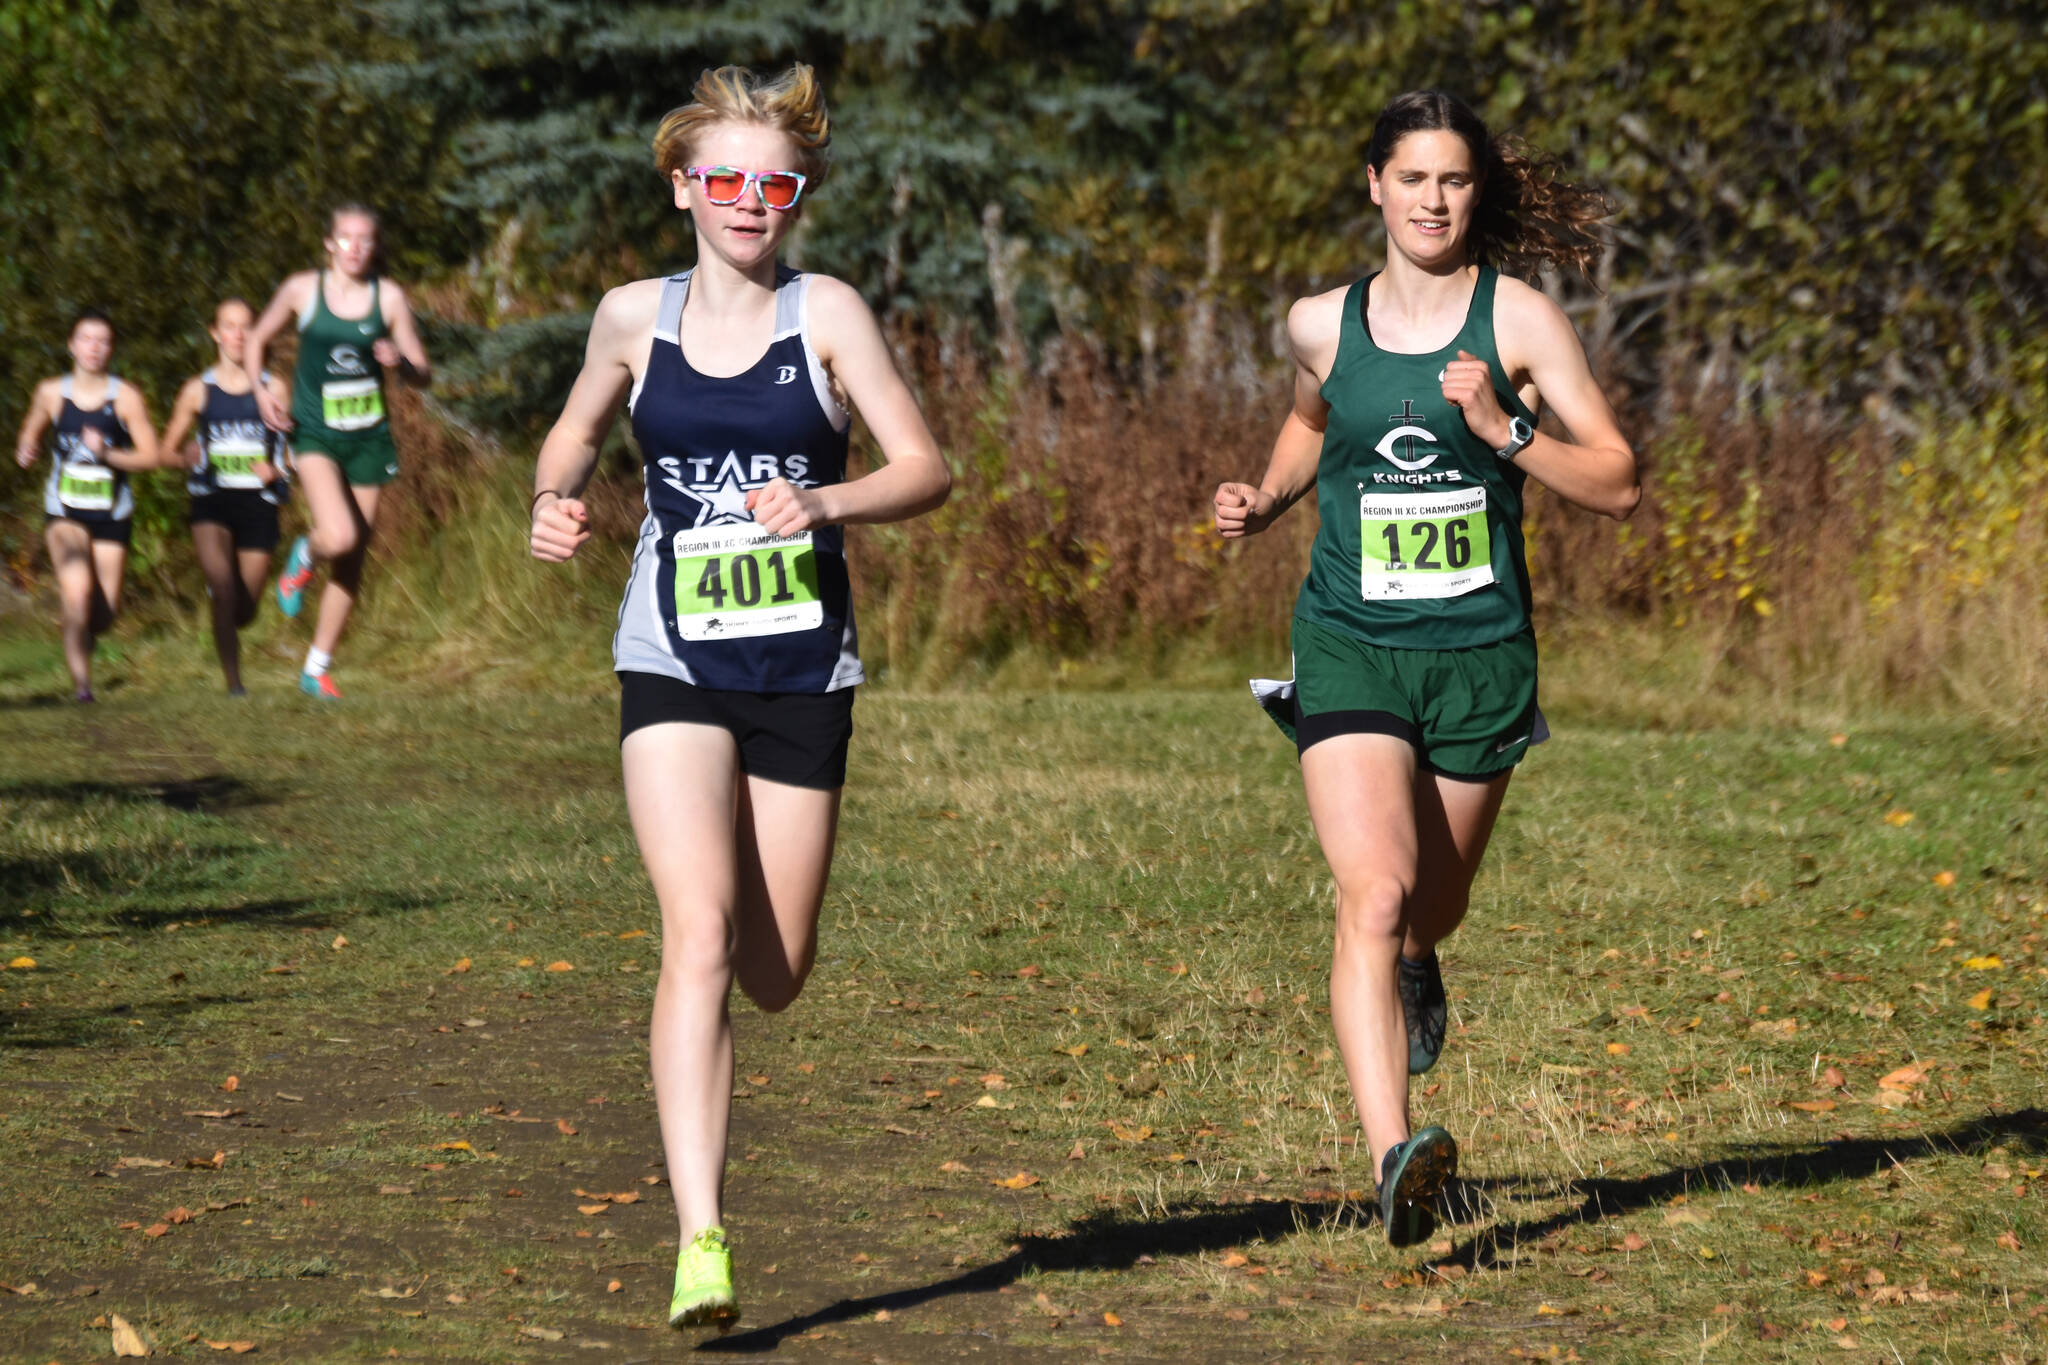 Soldotna’s Sophia Jedlicki and Colony’s Ella Hopkins race side by side during the Region 3/Division I girls race on Saturday, Oct. 1, 2022 at Tsalteshi Trails just outside of Soldotna, Alaska. (Jake Dye/Peninsula Clarion)